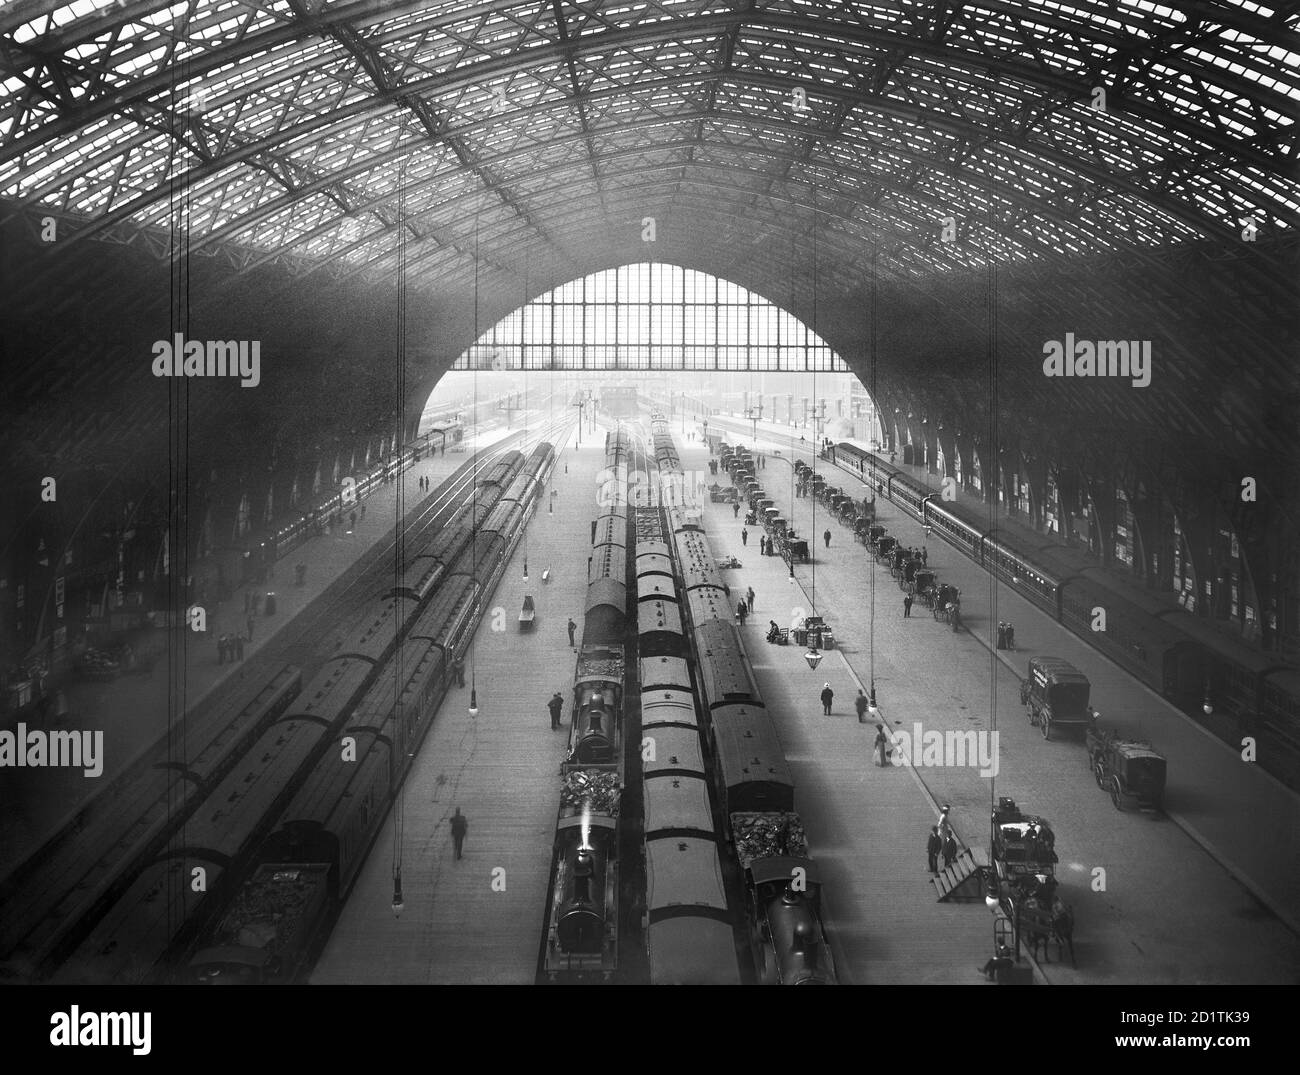 ST PANCRAS STATION, Camden, London. An interior view of St Pancras Station, looking down on the platforms which are busy with commuters. A line of hackney cabs wait for fares to the right of the photograph. The station was designed by W. H. Barlow in 1868. Campbells Press Studio, 1895. Stock Photo